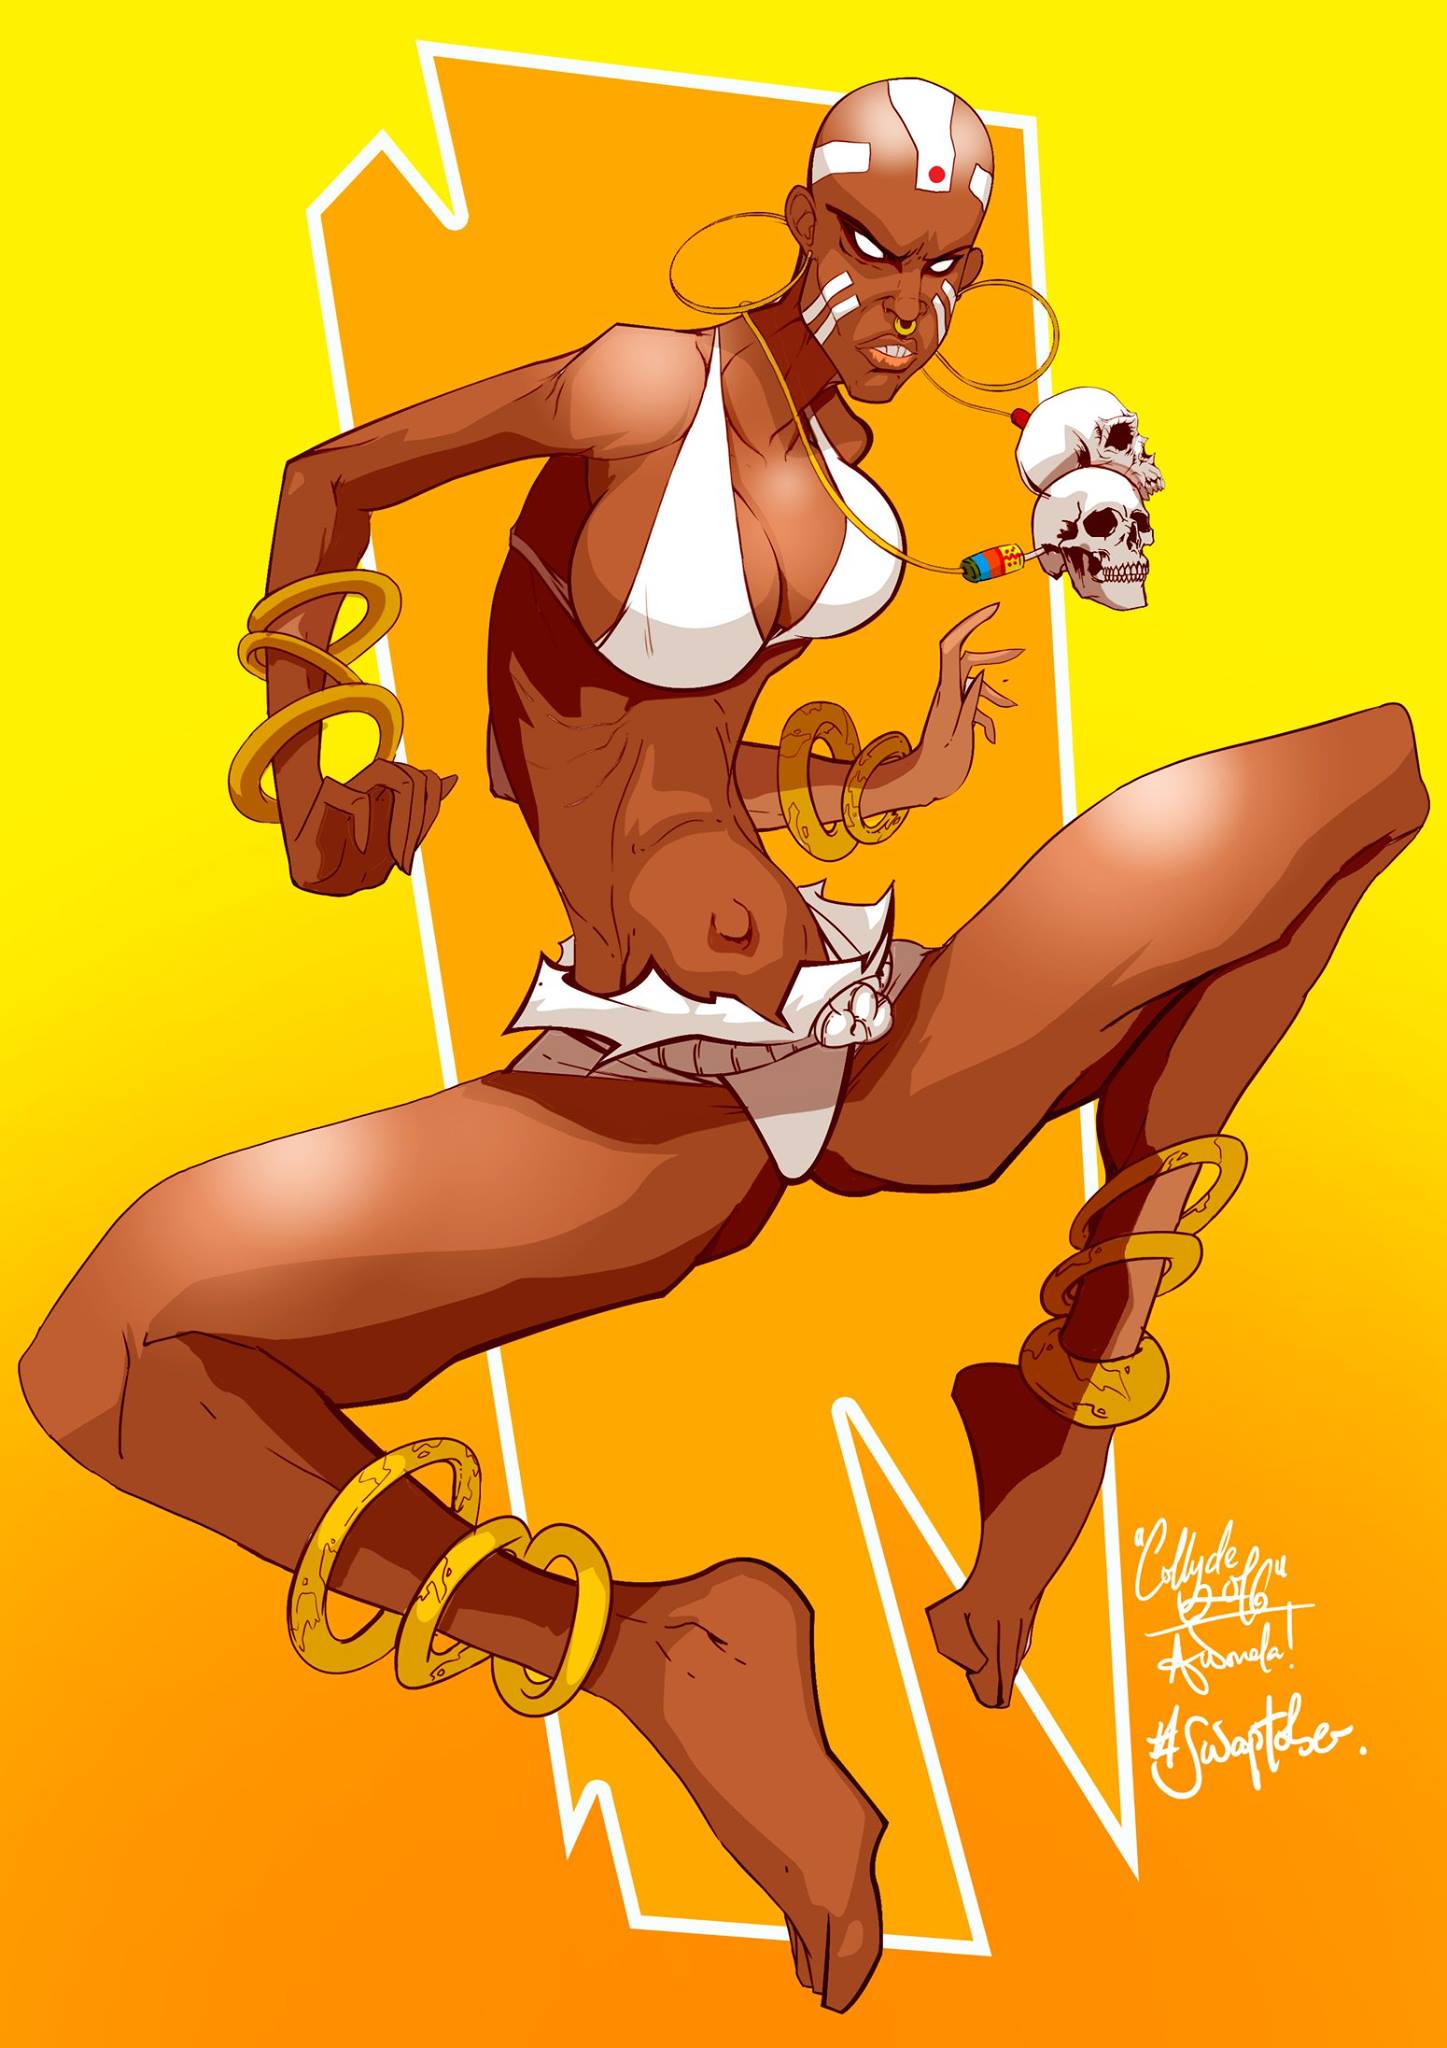 Female version of Dhalish (of Street Fighter) by Collyde Prime